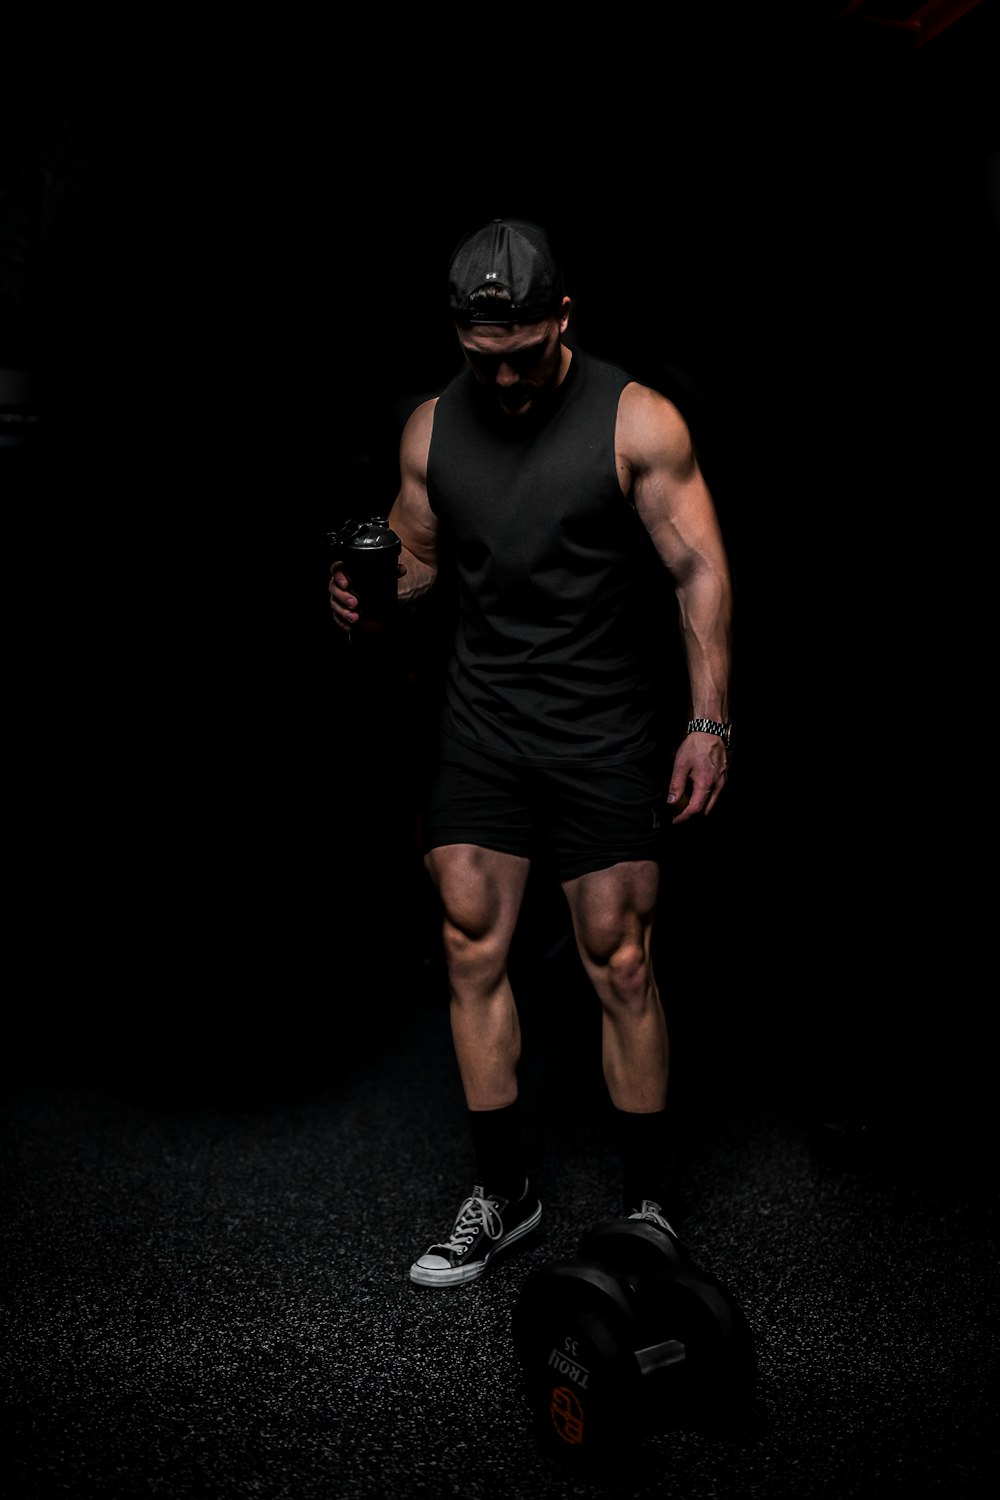 Man In Gym Pictures | Download Free Images on Unsplash